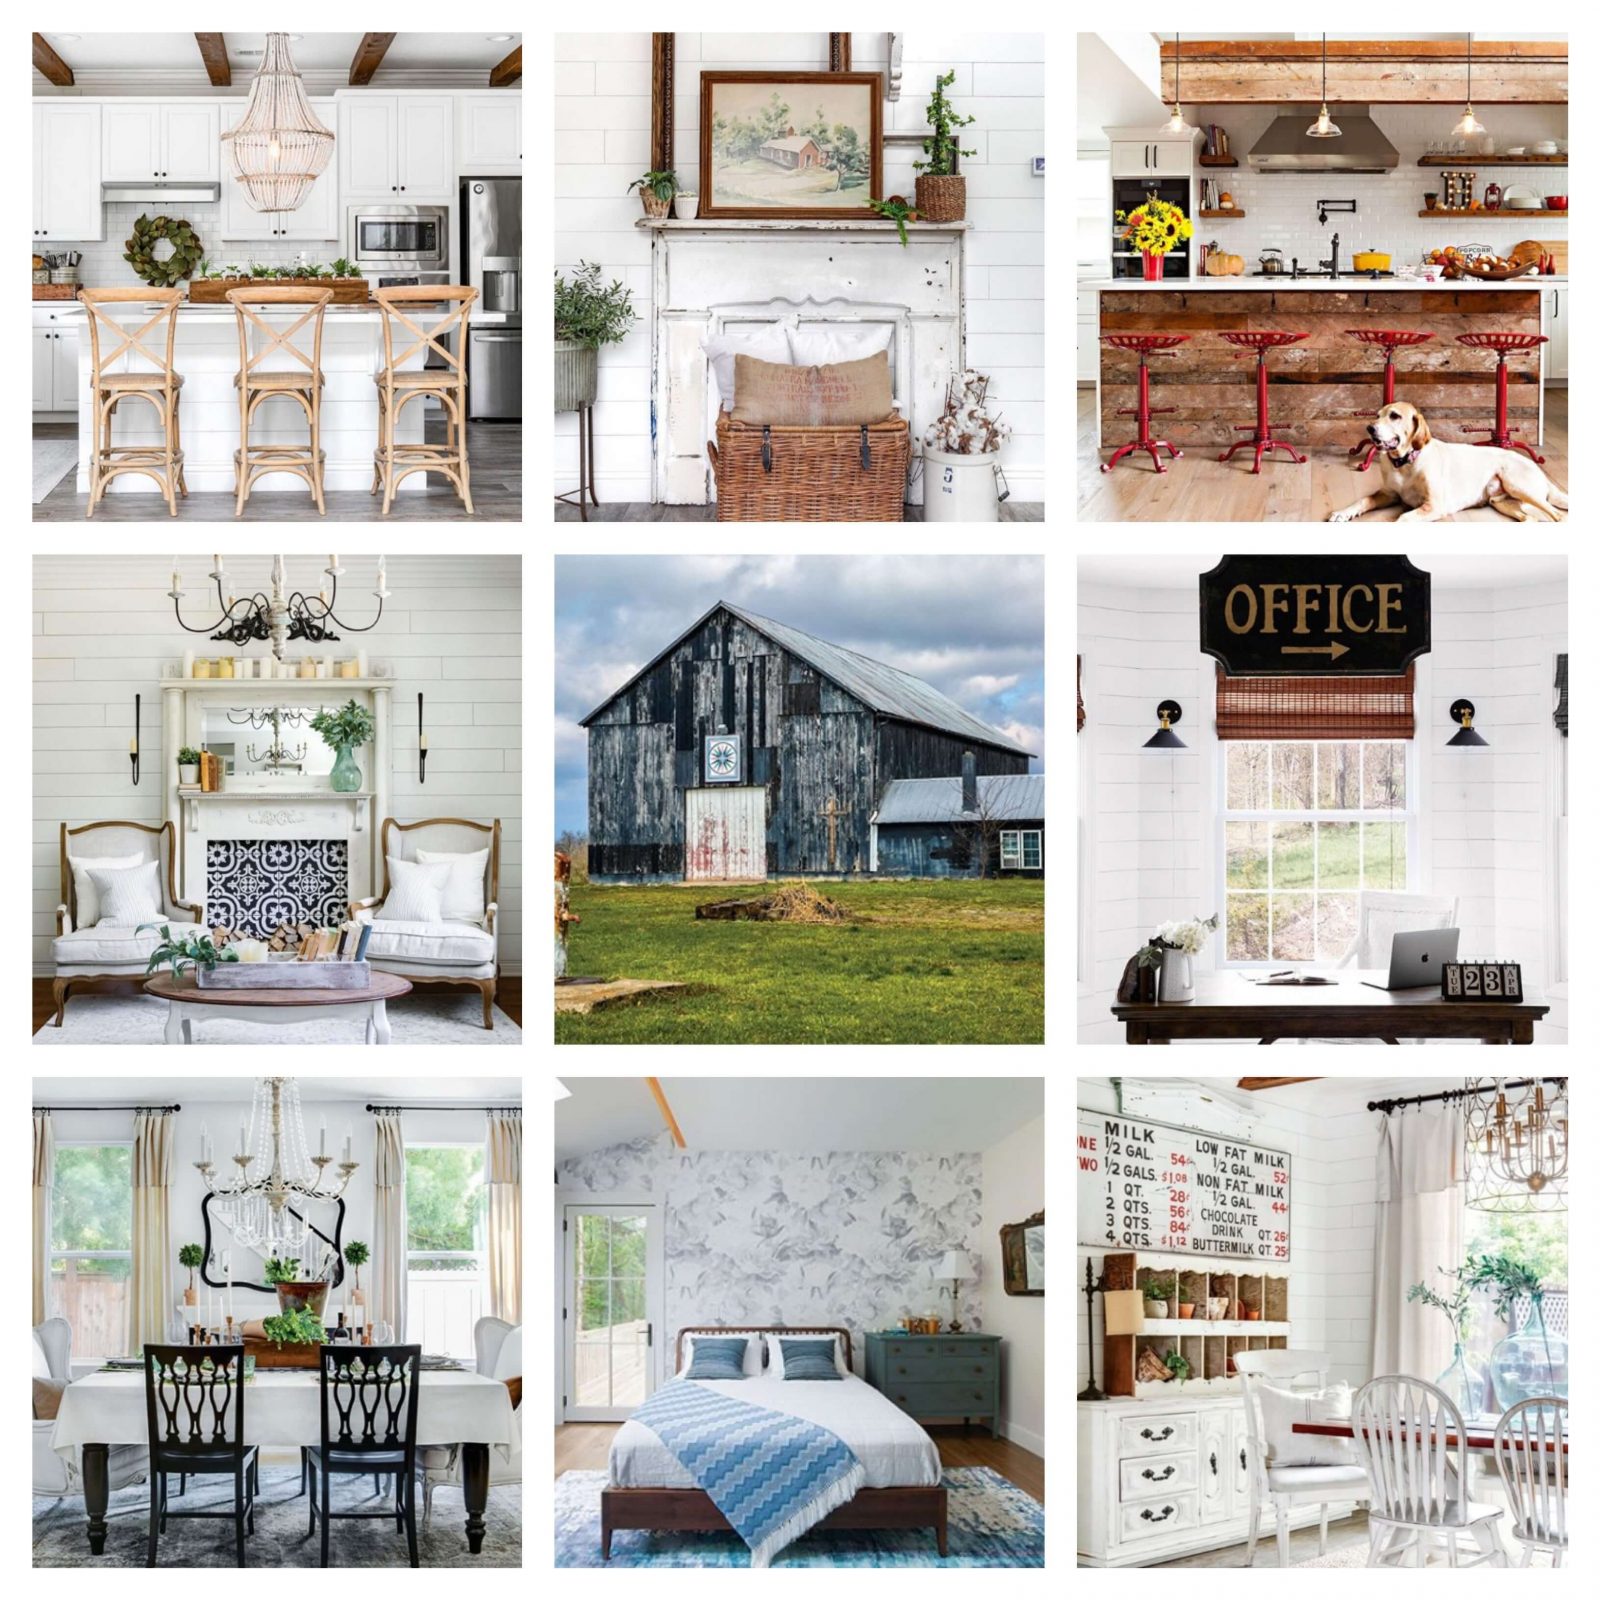 Mood board with farmhouse style home images